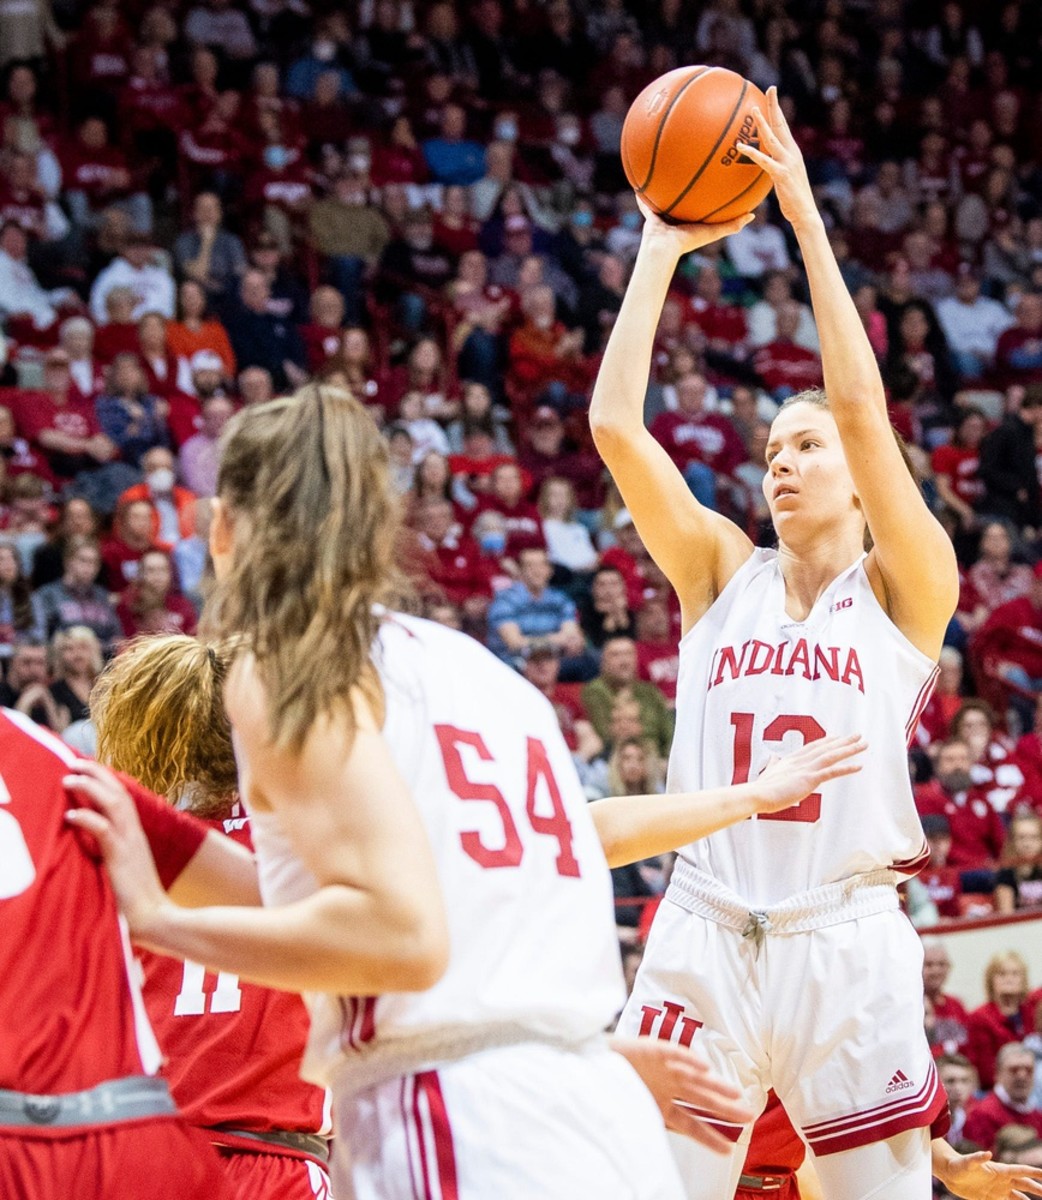 Indiana's Yarden Garzon (12) scores during the first half of the Indiana versus Wisconsin women's basketball game at Simon Skjodt Assembly Hall on Sunday, Jan. 15, 2023.